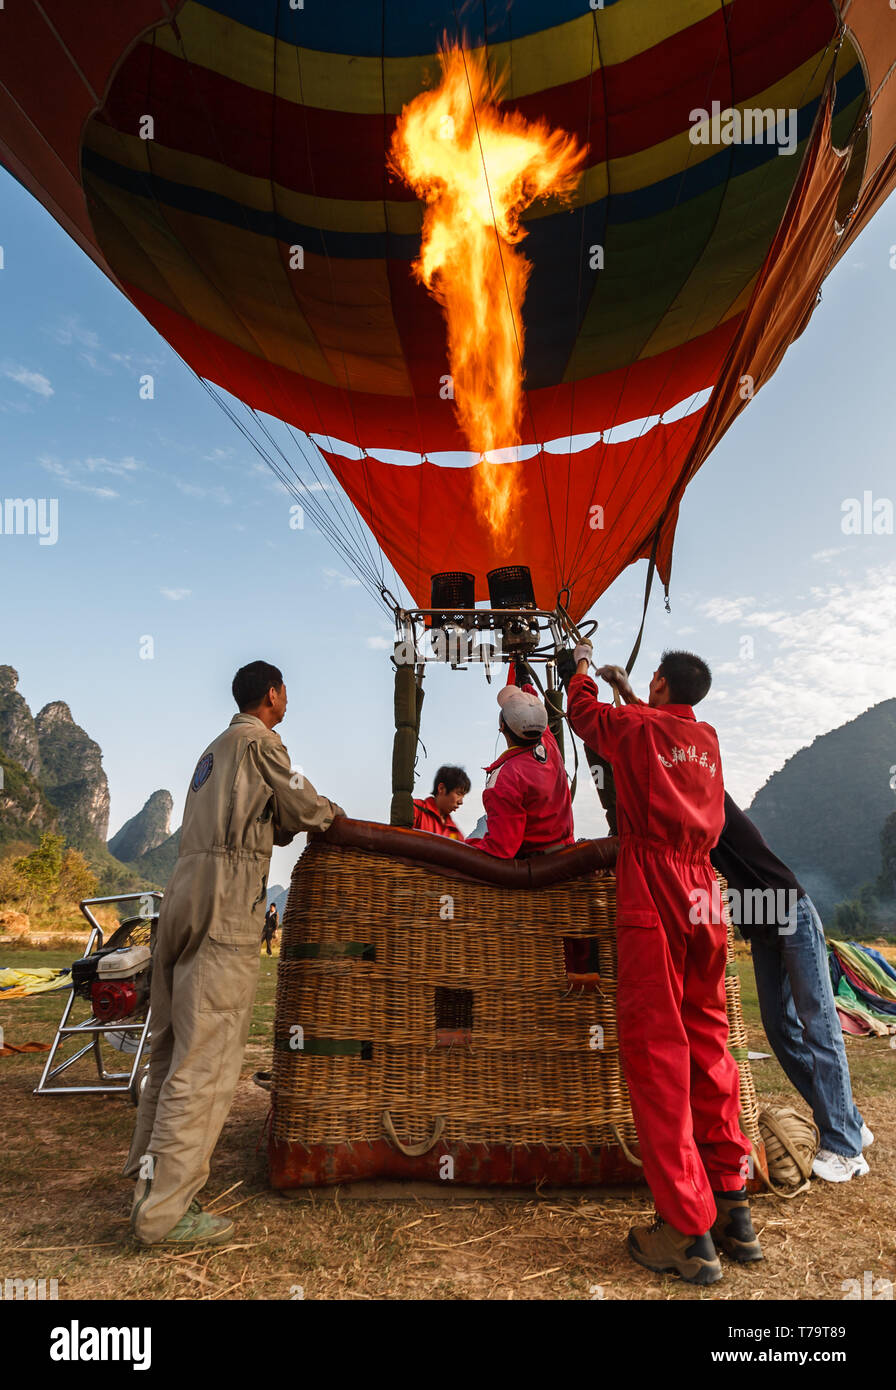 Workers in basket for safety check flame adjustment so people can have a hot air balloon  ride over the Yangshao Valley and mountains Stock Photo